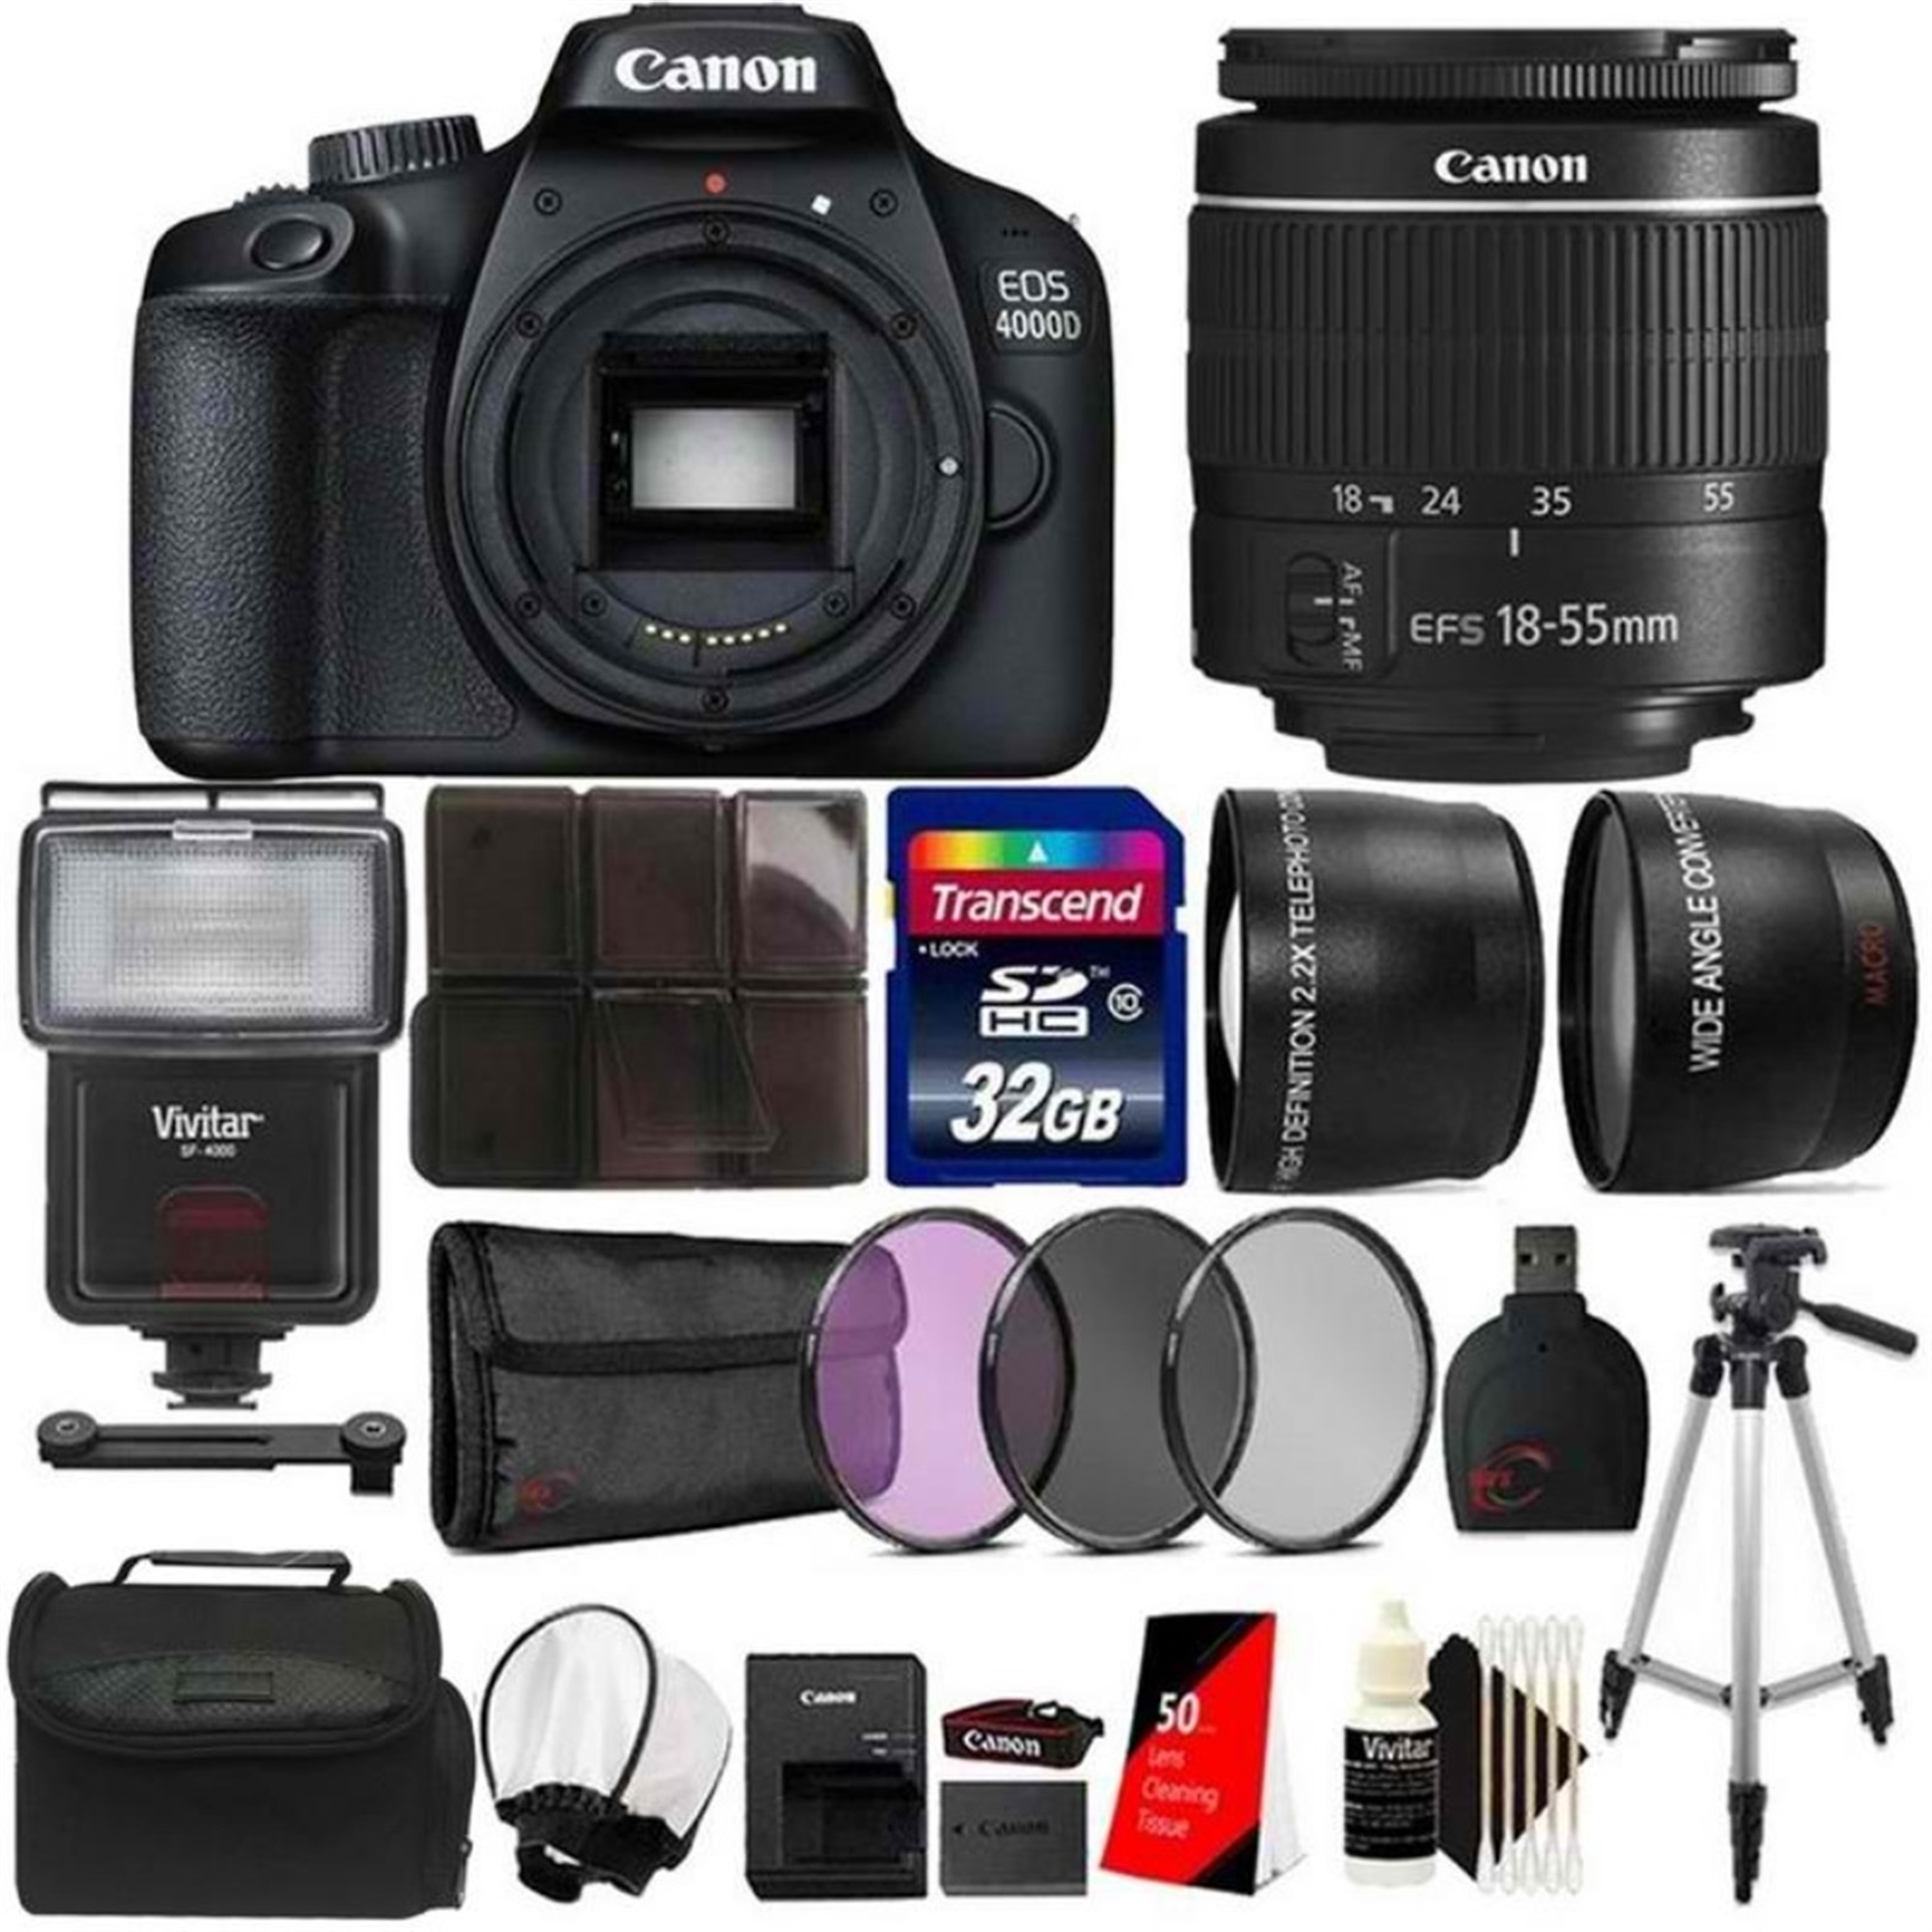 Canon EOS 4000D 18MP DSLR Camera with 18-55mm lens + Flash Top Bundle - image 1 of 9